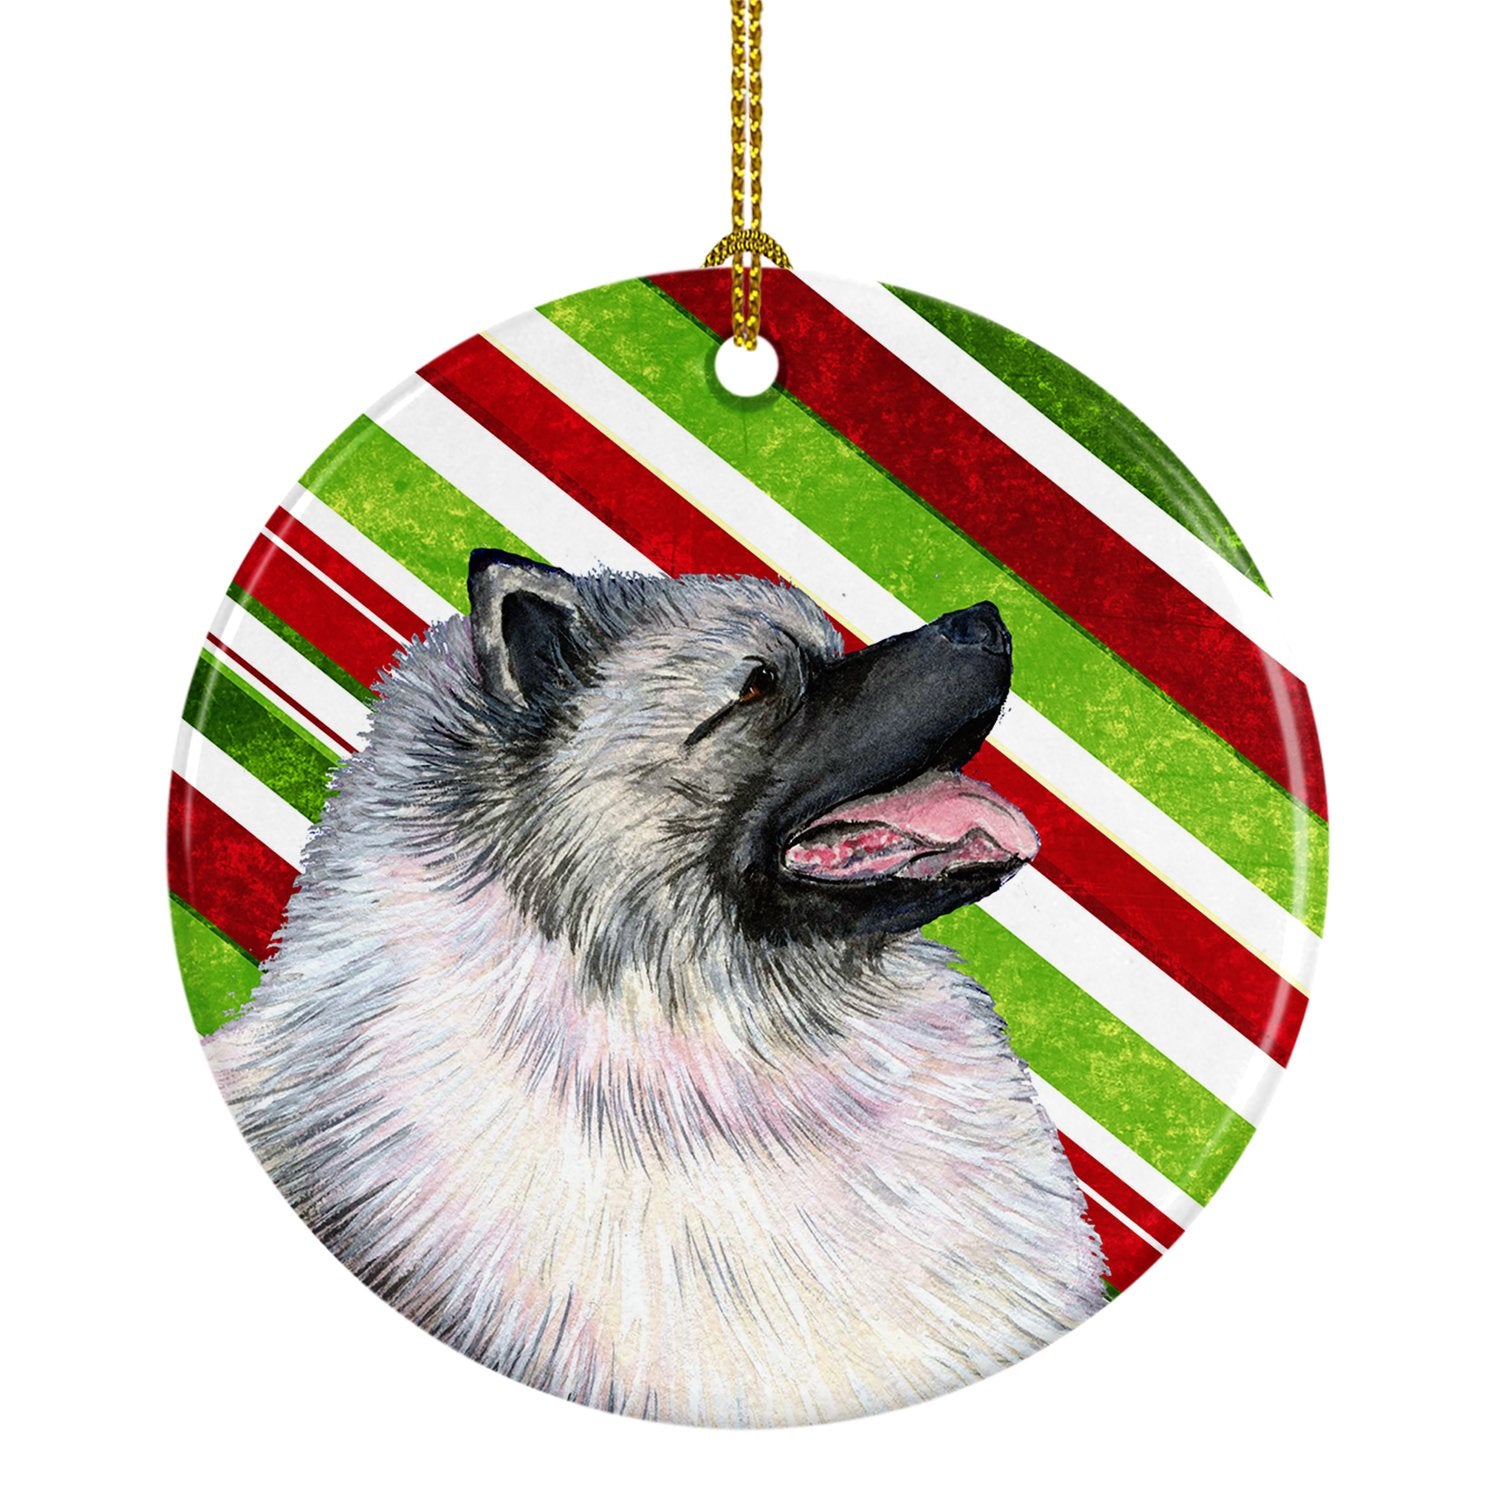 Keeshond Candy Cane Holiday Christmas Ceramic Ornament SS4557 by Caroline's Treasures